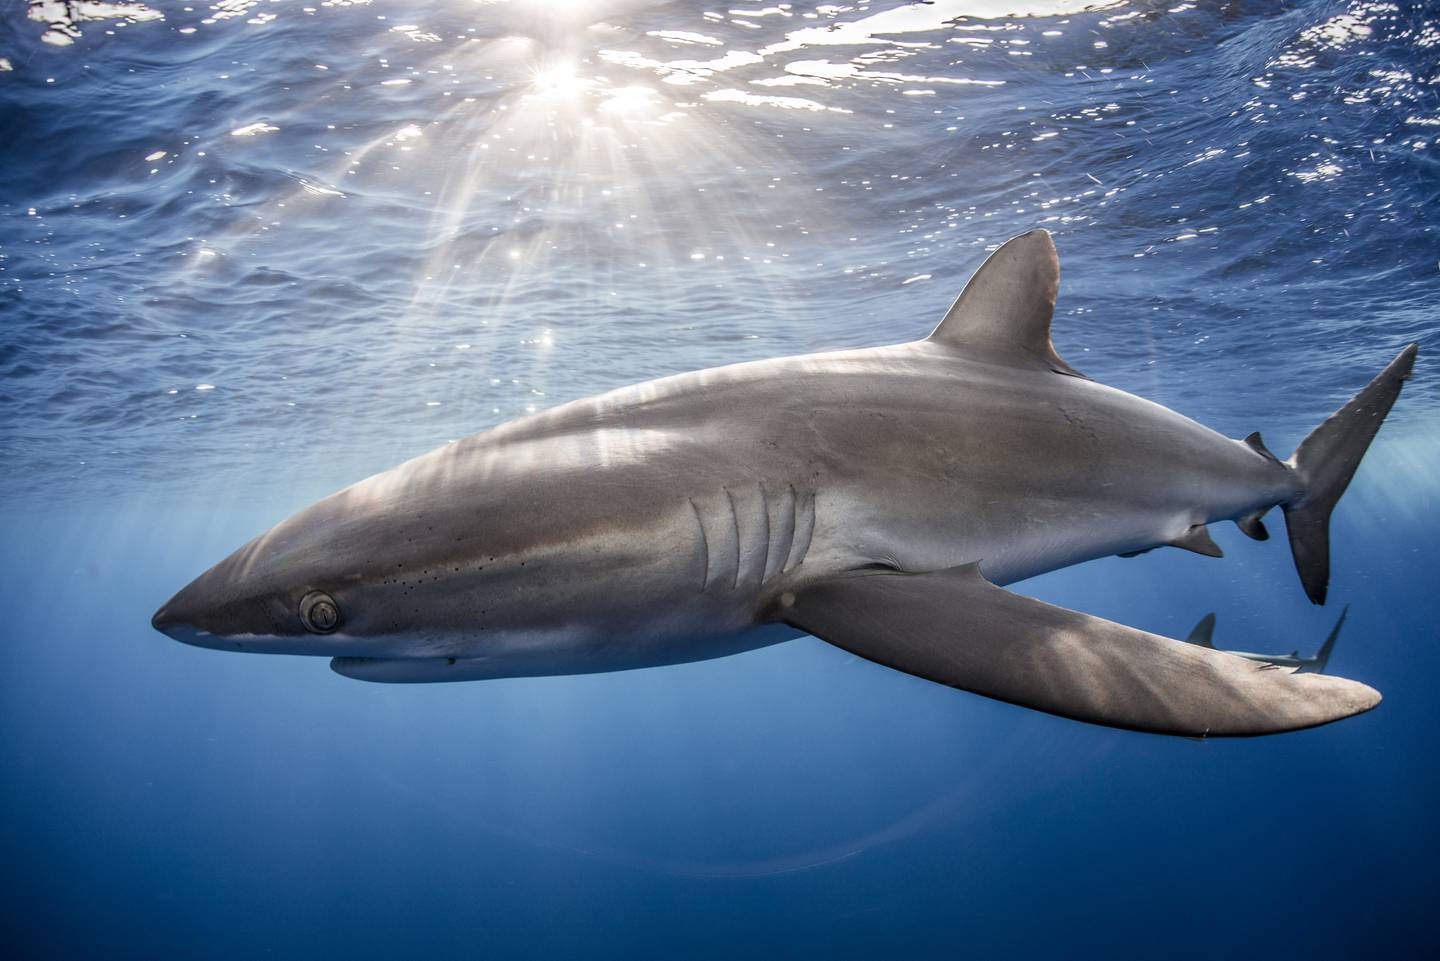 Silky shark (Carcharhinus falciformis) was the second most common kind of shark found in the analysed pet food. Photo: Getty Images